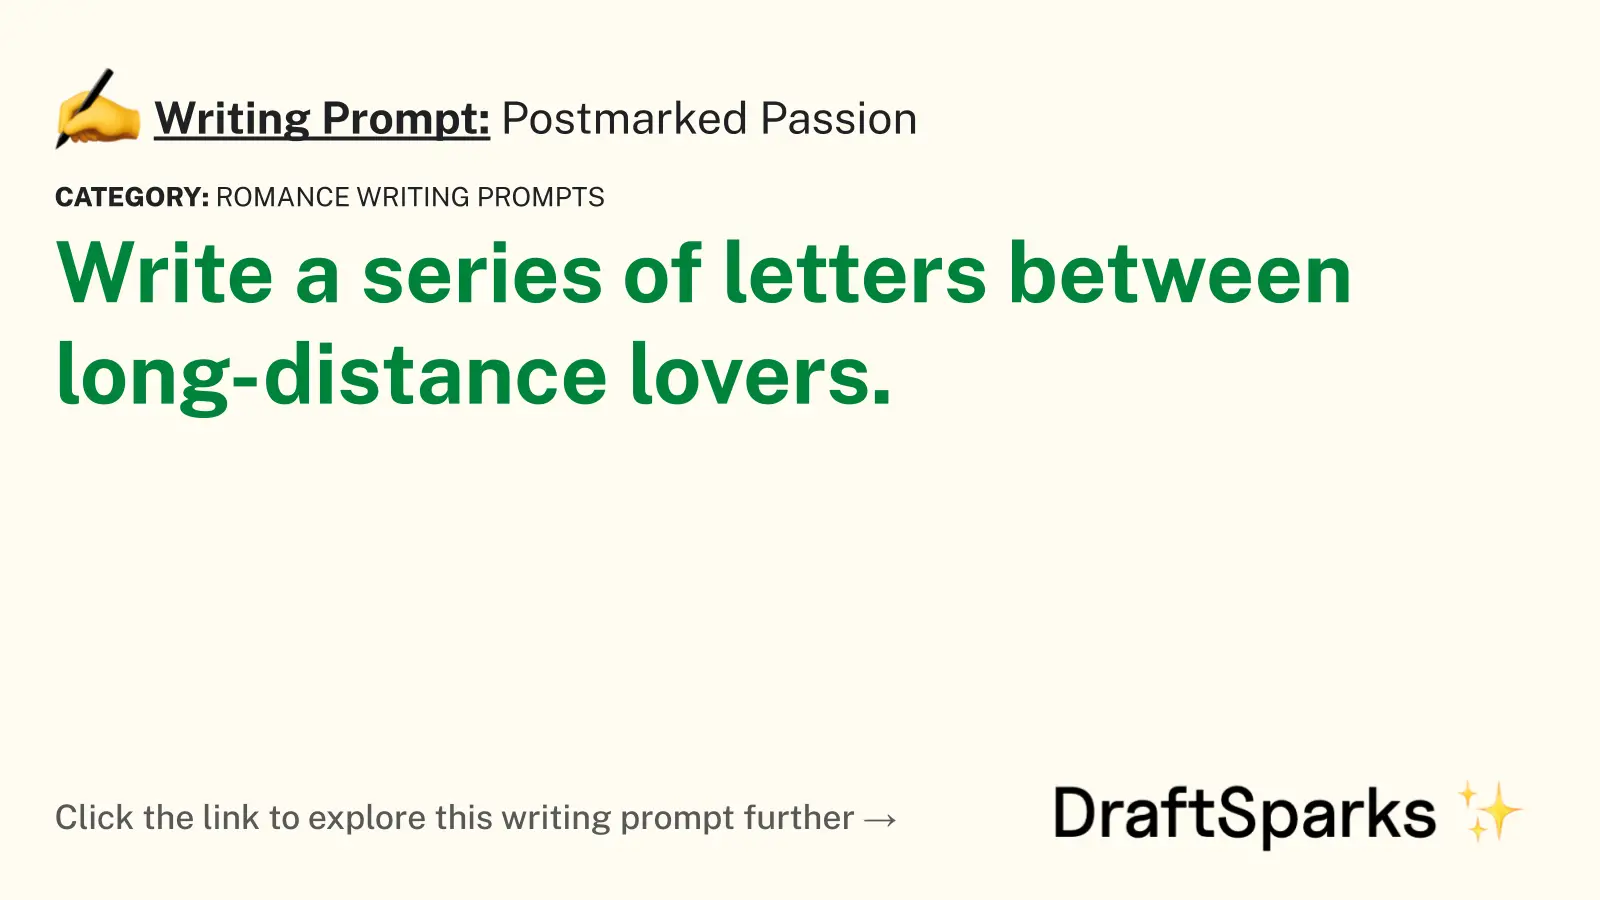 Postmarked Passion